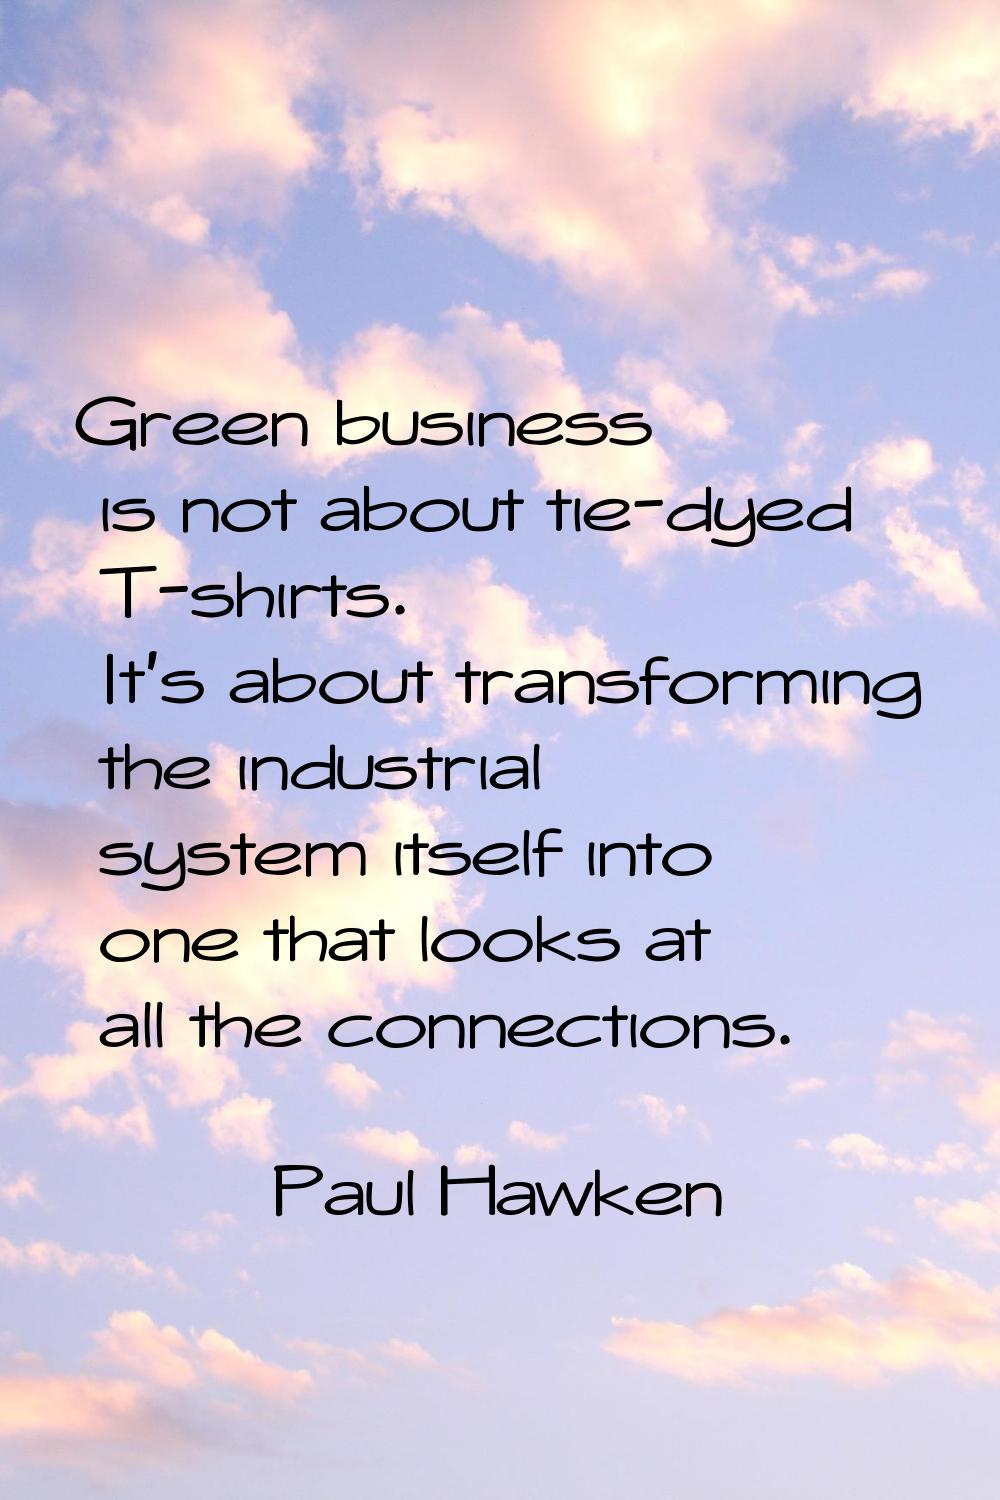 Green business is not about tie-dyed T-shirts. It's about transforming the industrial system itself